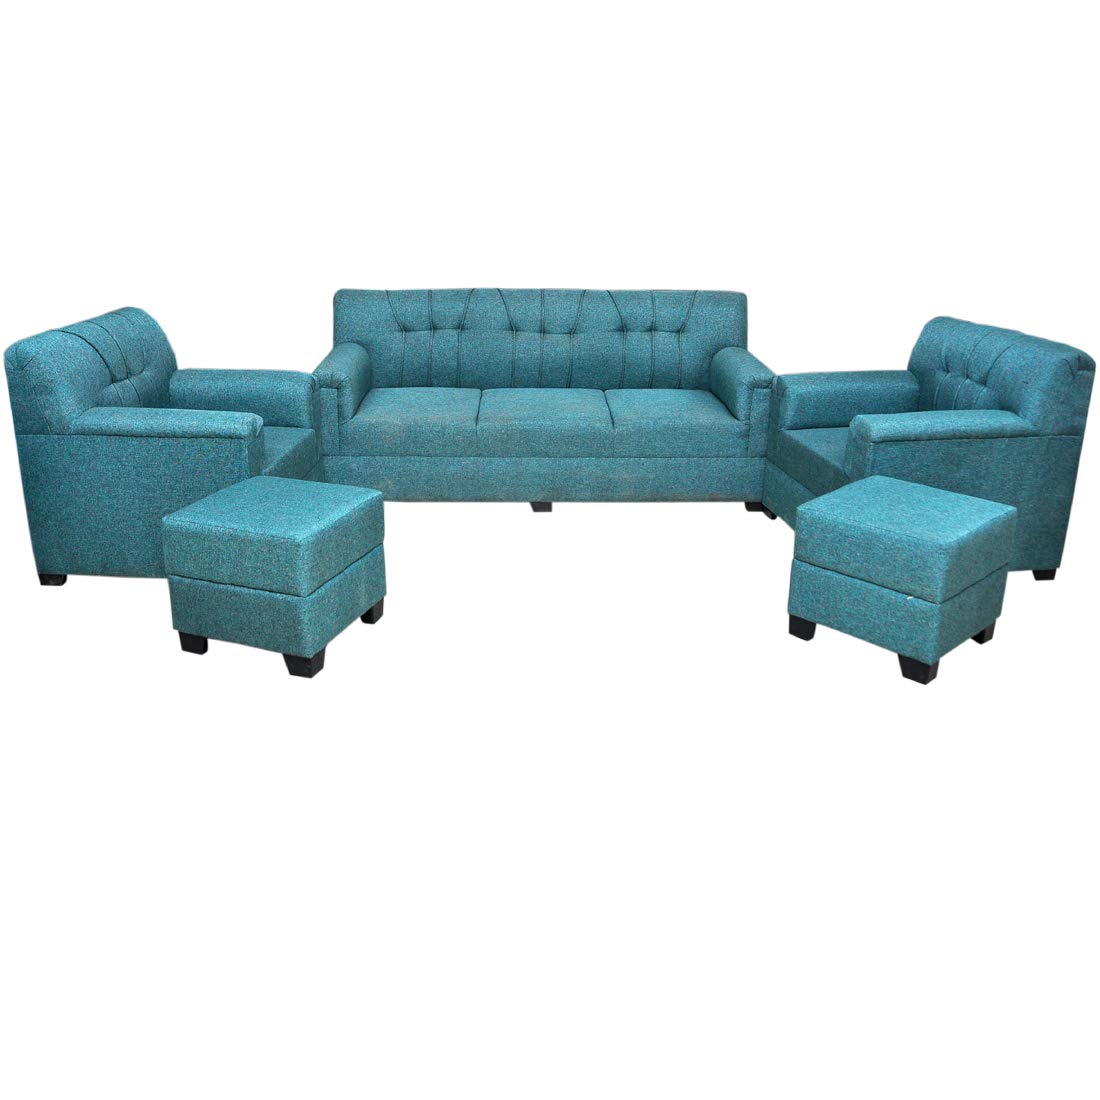 Bowzar 5 Seater Sofa Set With 2 Puffy Premium Fabric and High Density Foam Teal